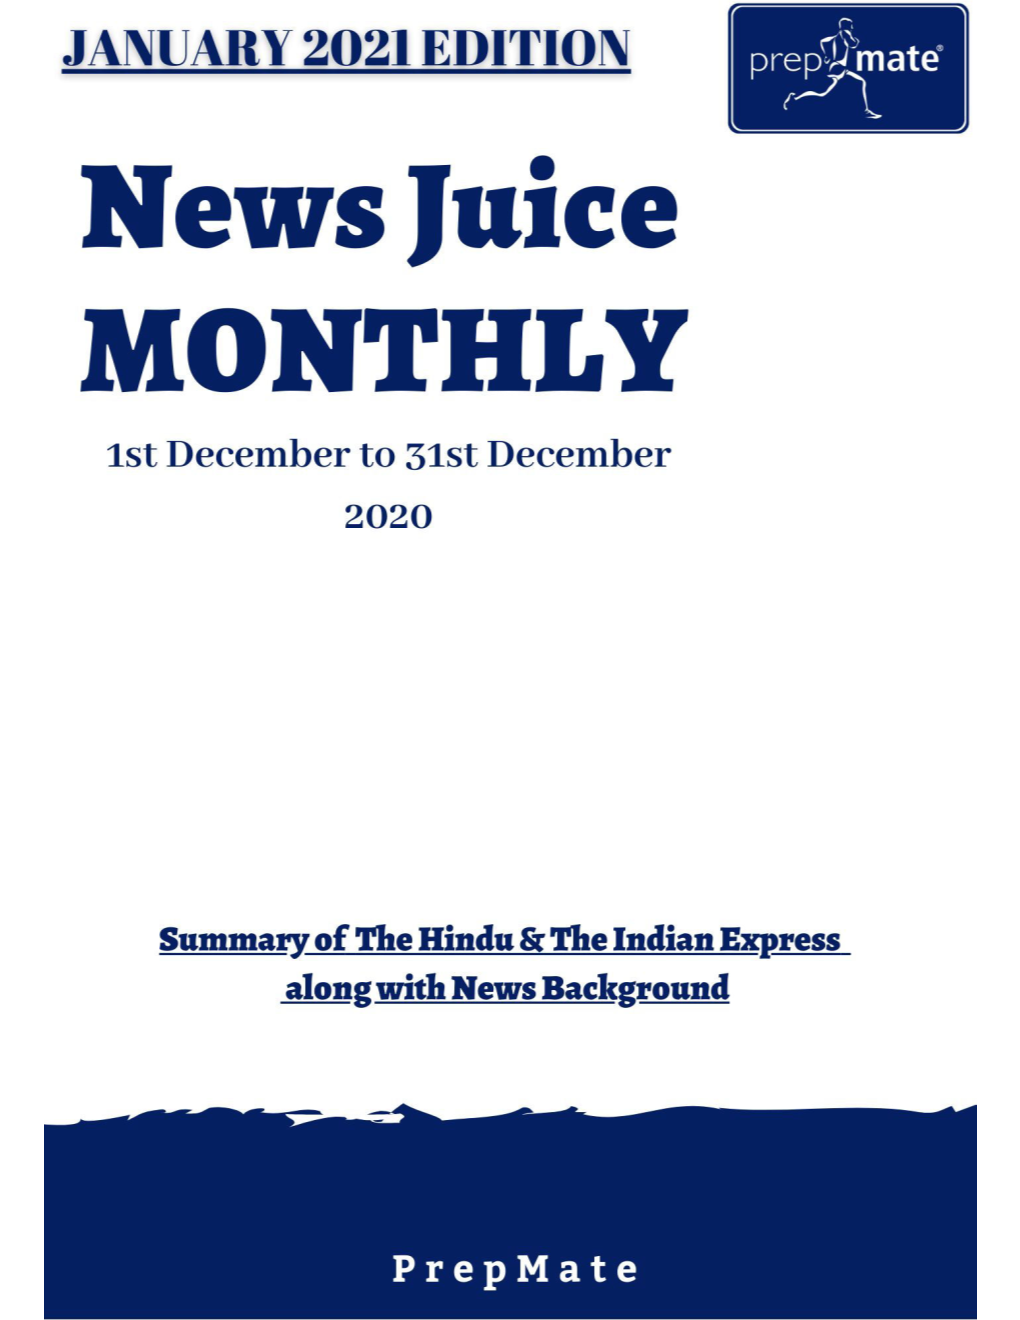 News Juice Monthly – January 2021 Edition